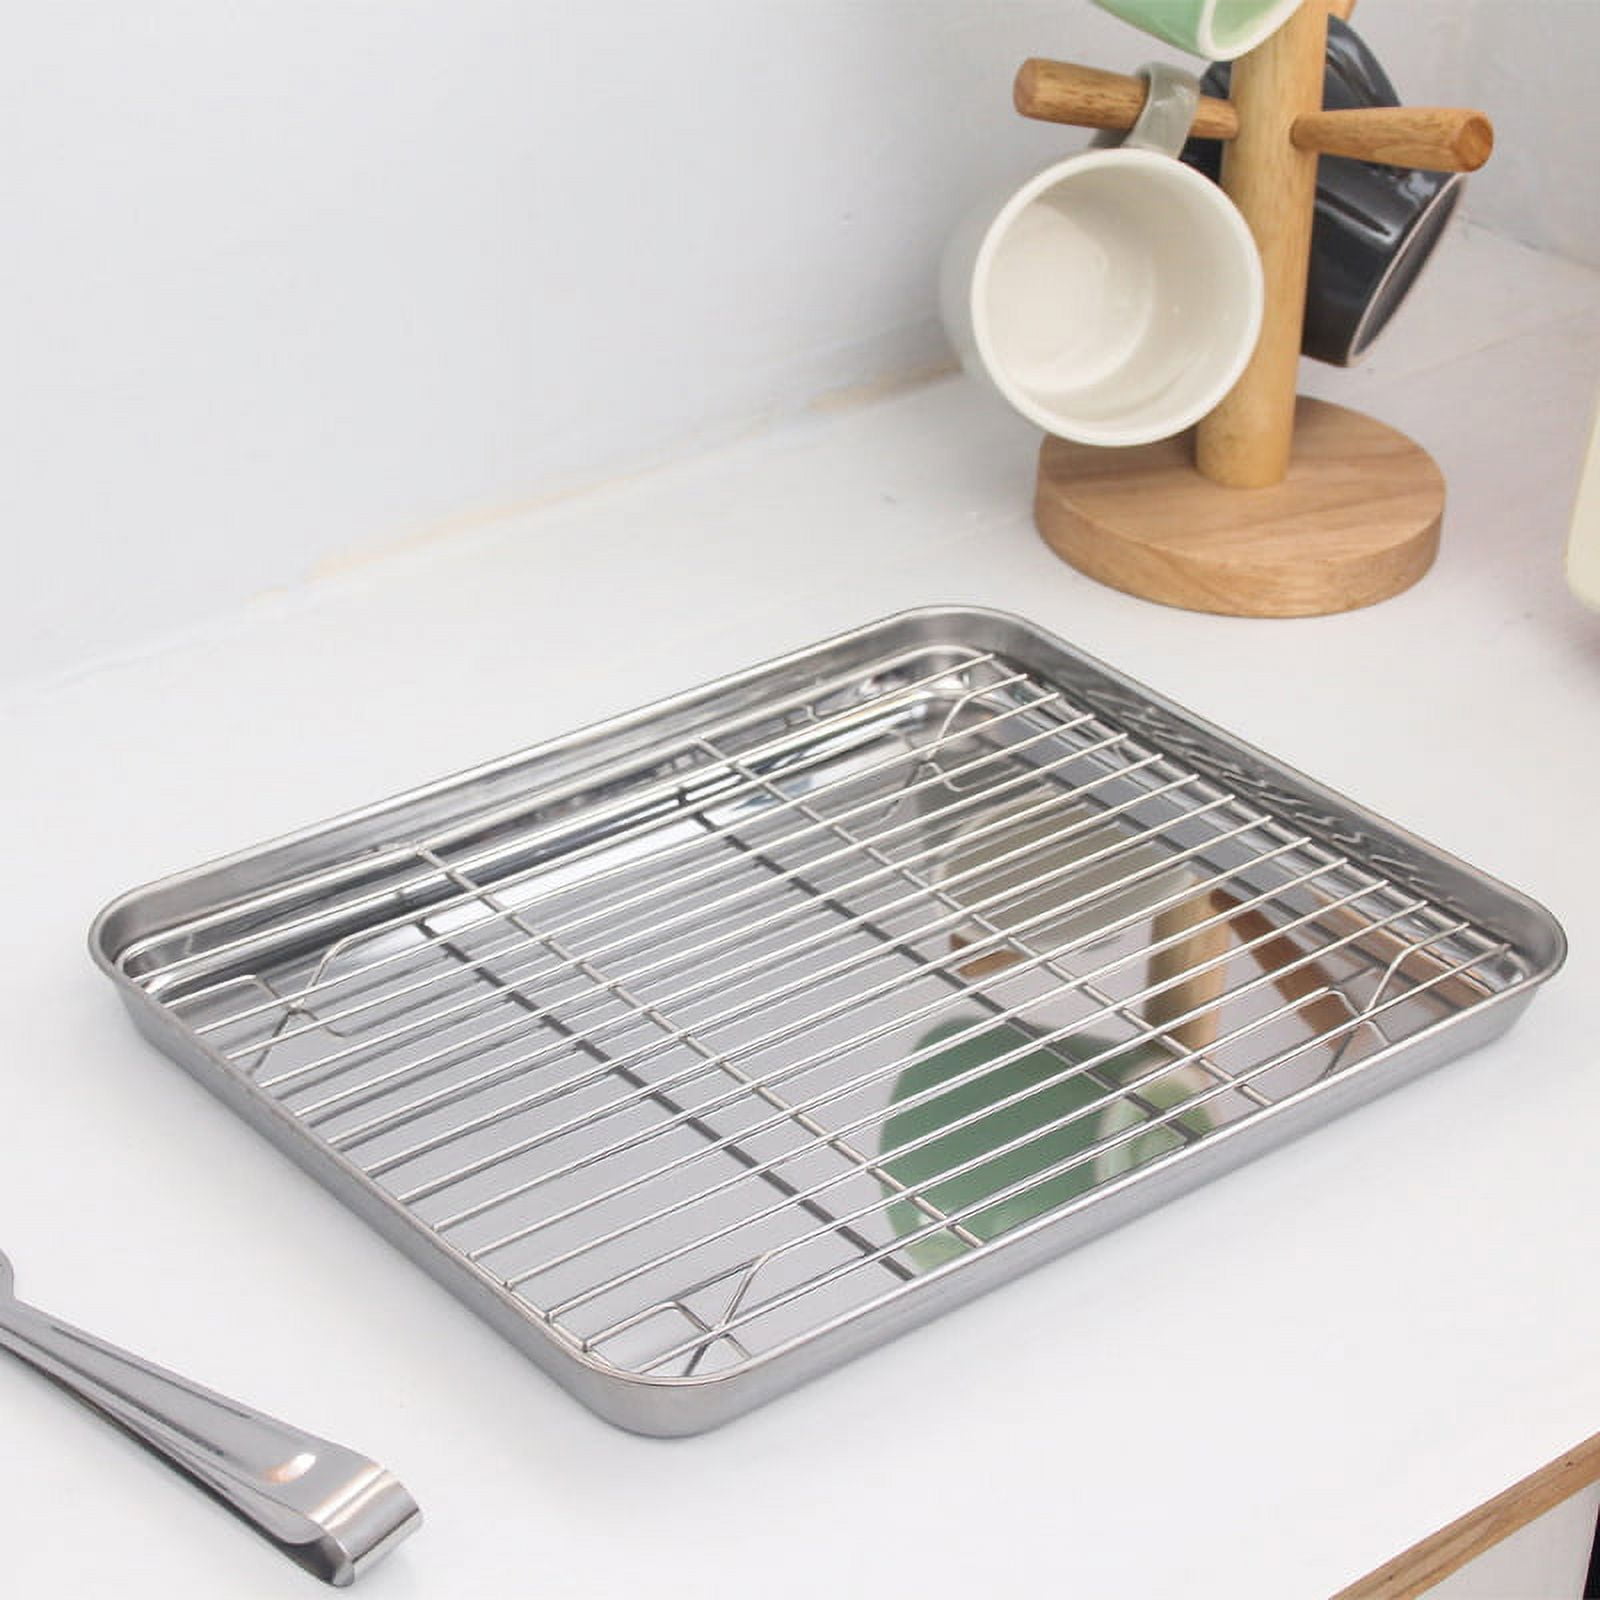  2Pcs Stainless Steel Baking Sheet With Rack,Cookie Sheets and  Non-stick Cooling Rack,Food Grade Baking Pan Tray For Oven,Extra Rectangle  Size Baking sheet,Warp Resistant&Heavy Duty&Non Toxic (XL): Home & Kitchen